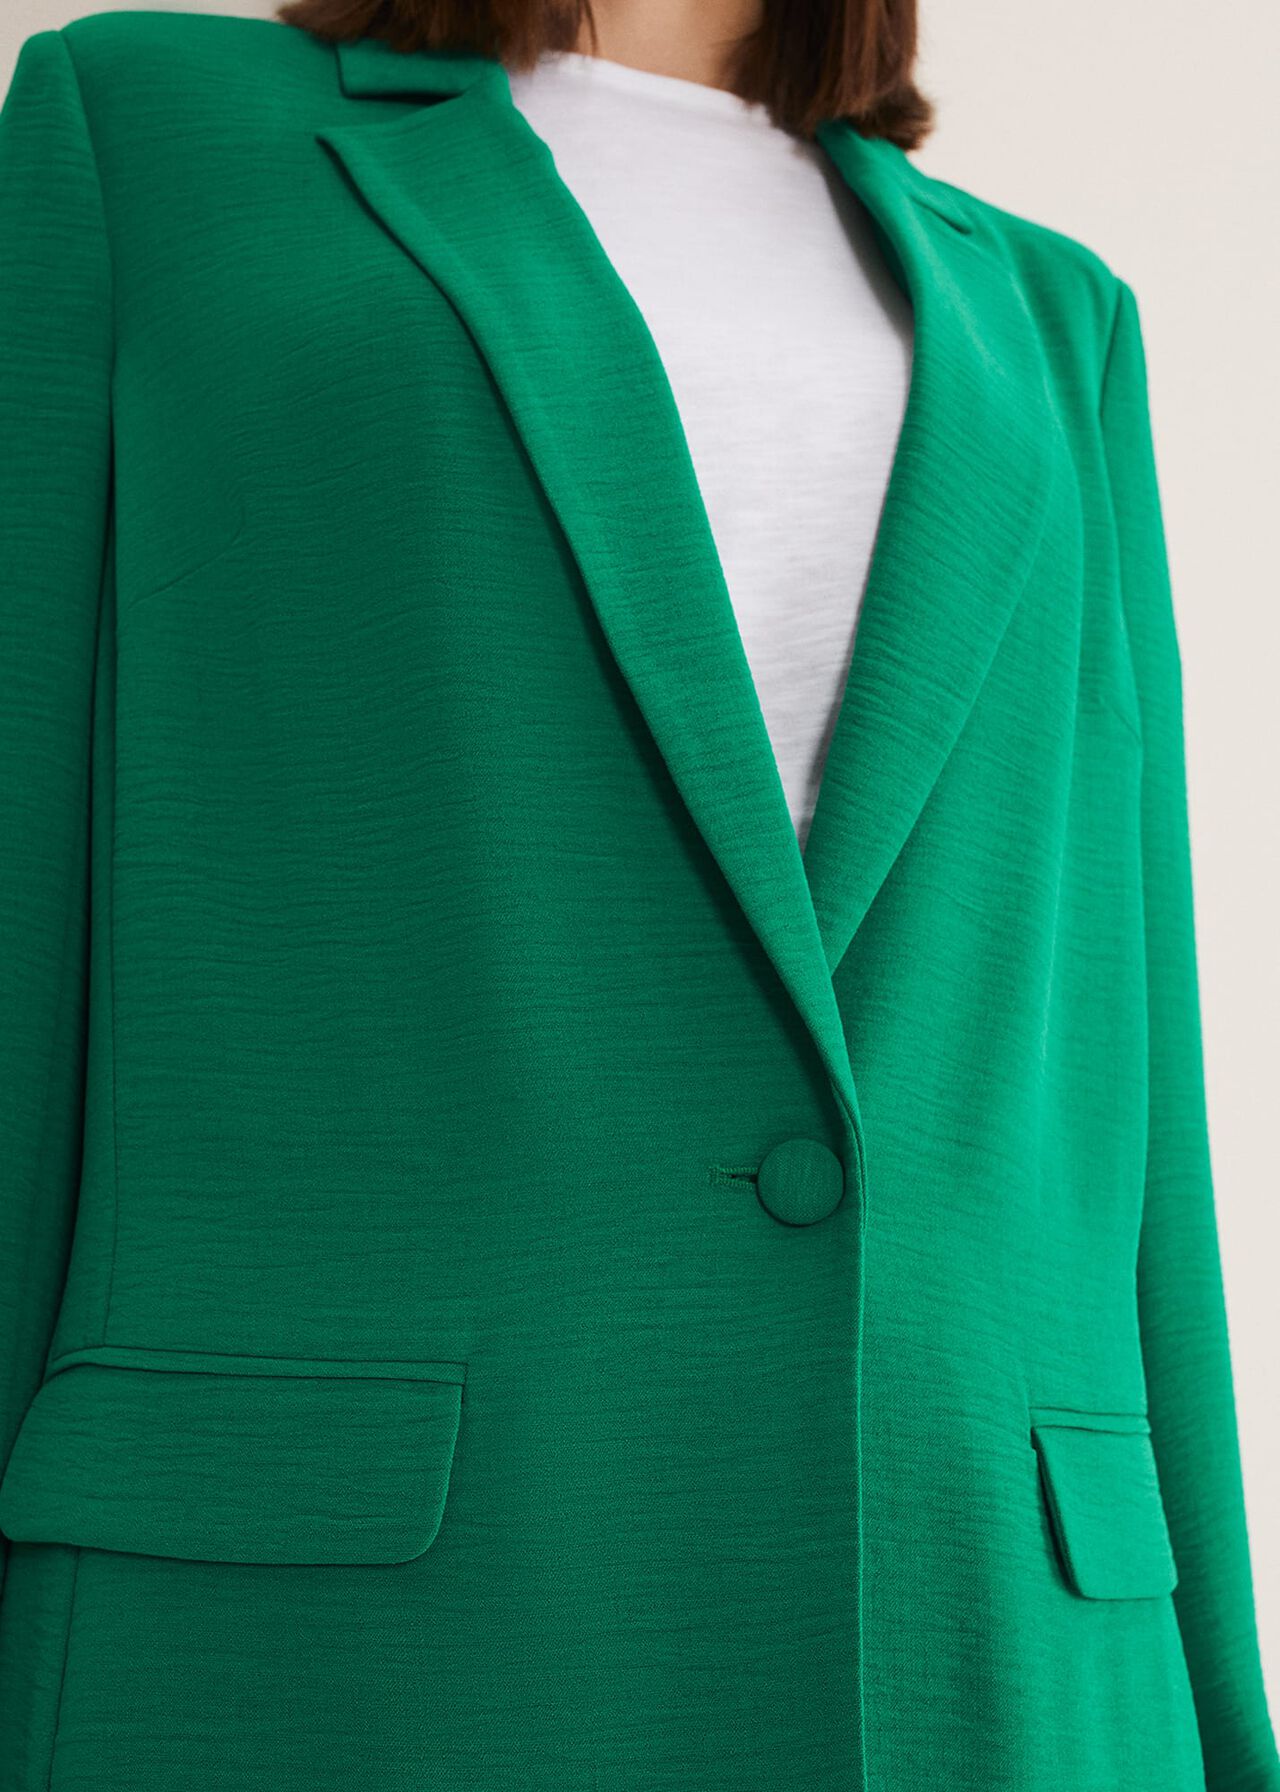 Woman wearing green suit co-ord